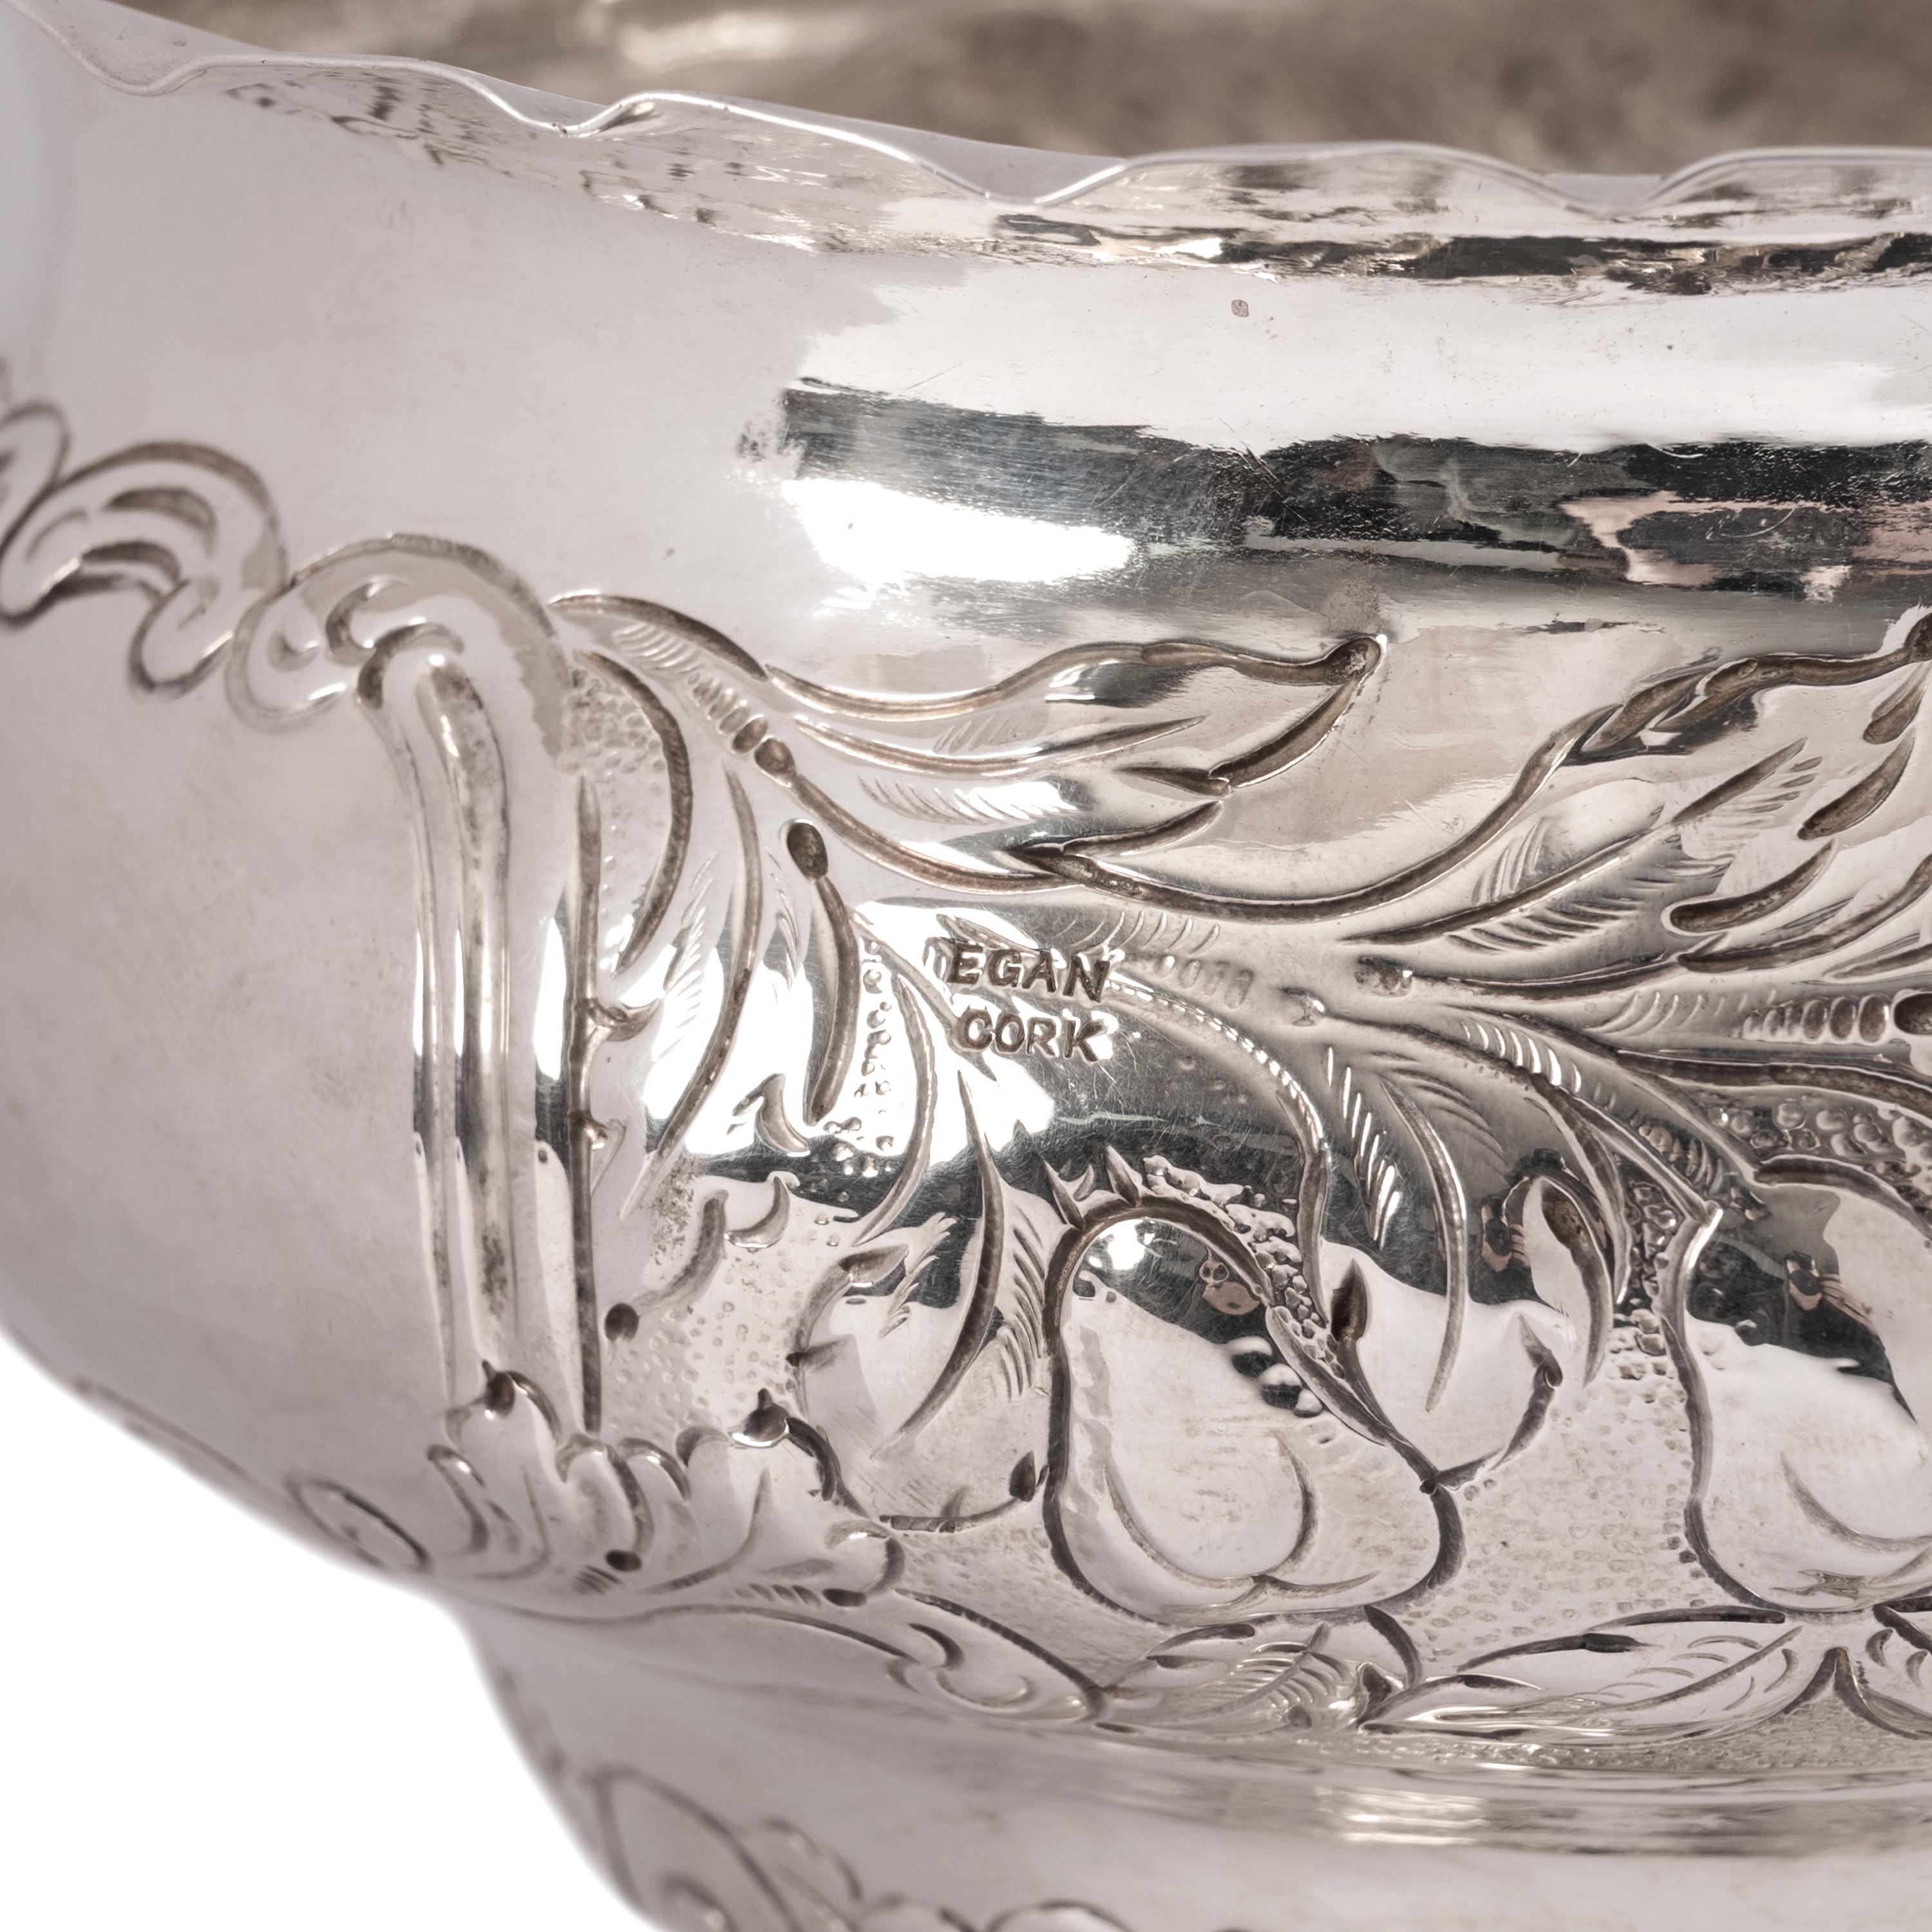 Irish Sterling Silver Repousse Engraved Bowl William Egan Cork Dublin 1911 In Excellent Condition For Sale In Portland, OR